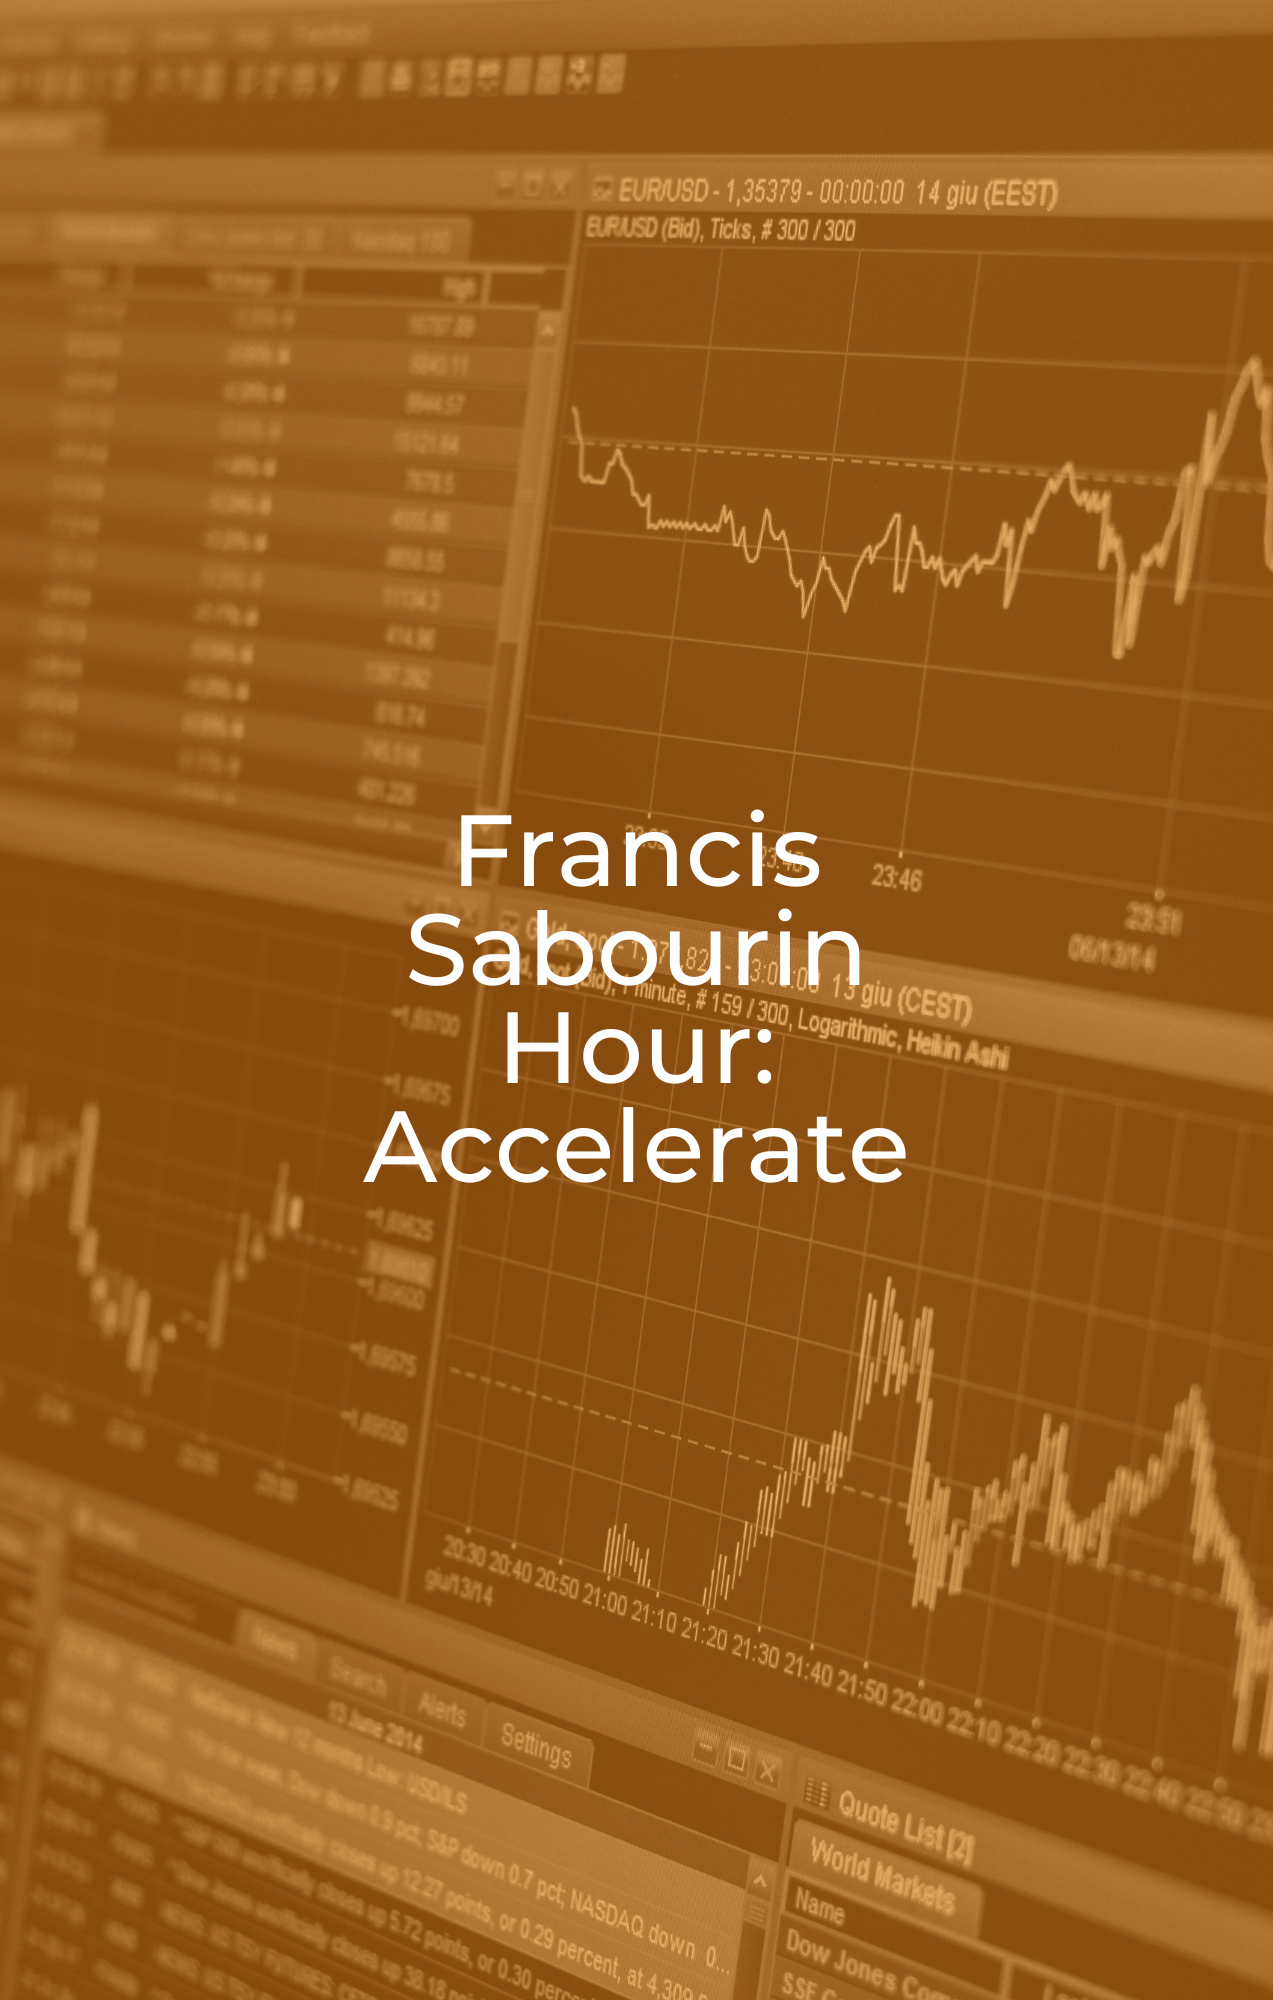 Francis Sabourin Hour: Accelerate